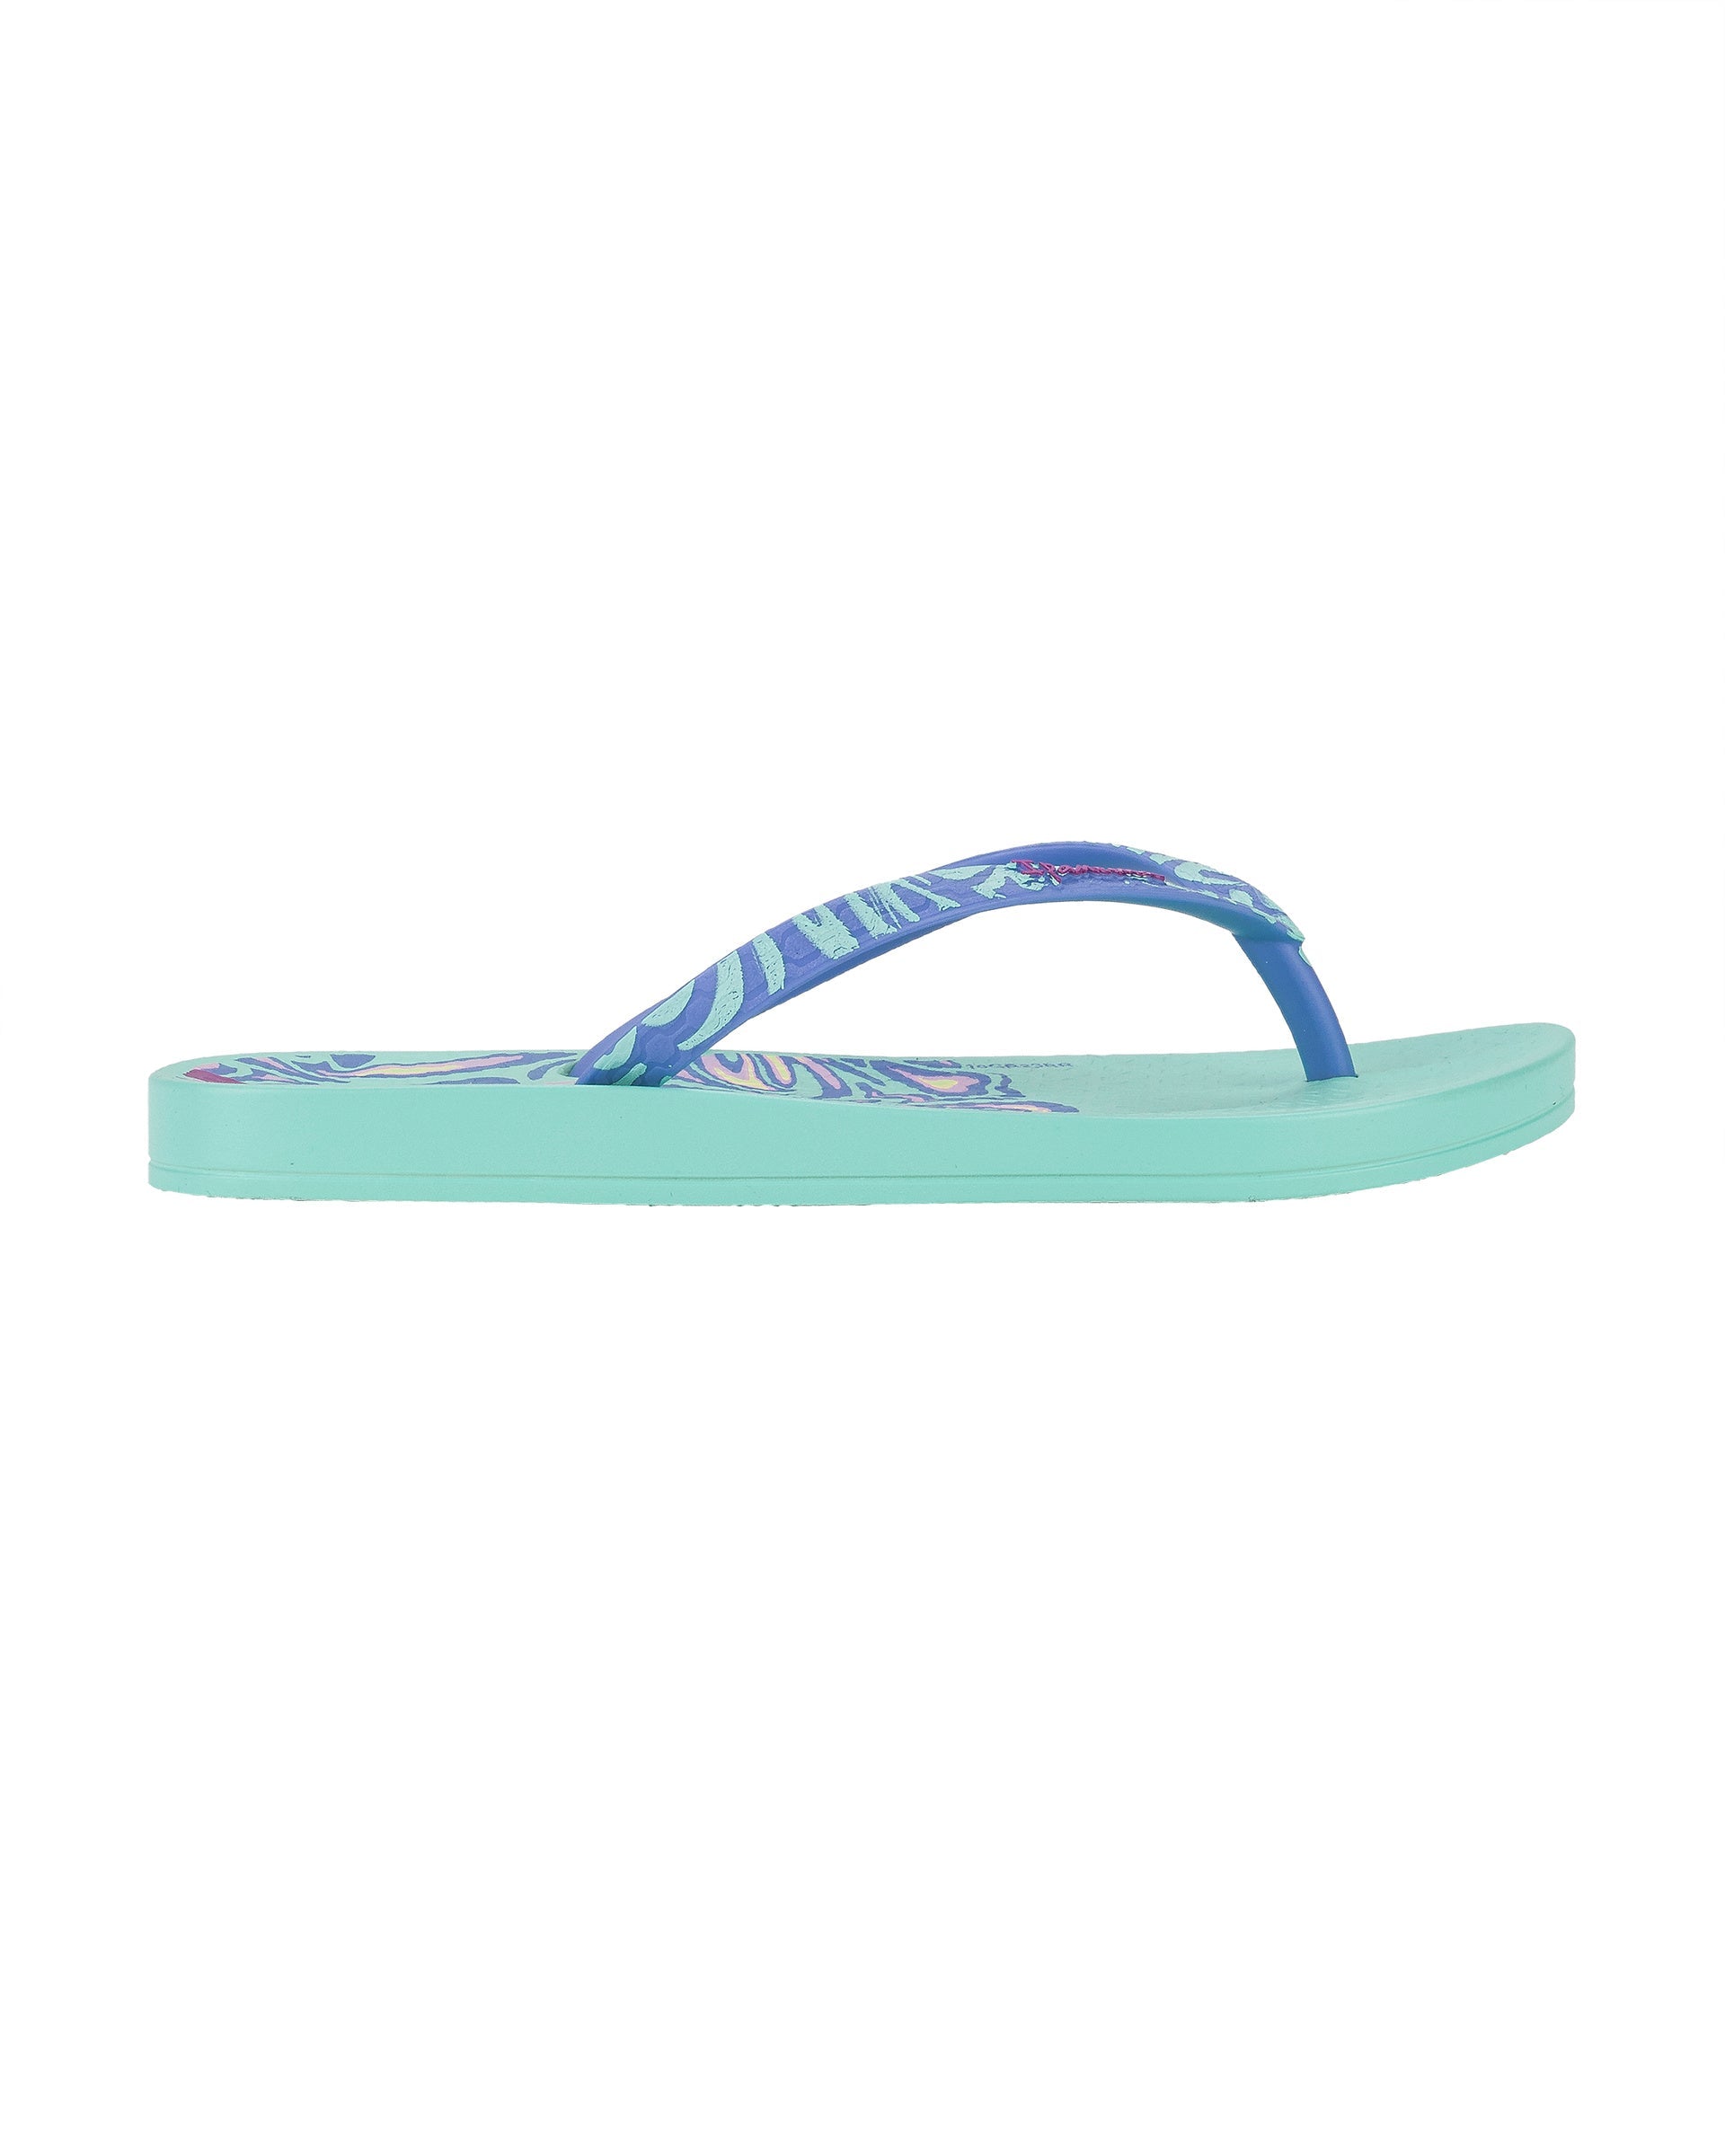 Outer side view of a green Ipanema Nostalgic Hearts kid's flip flop with heart outlines on insole and blue strap.